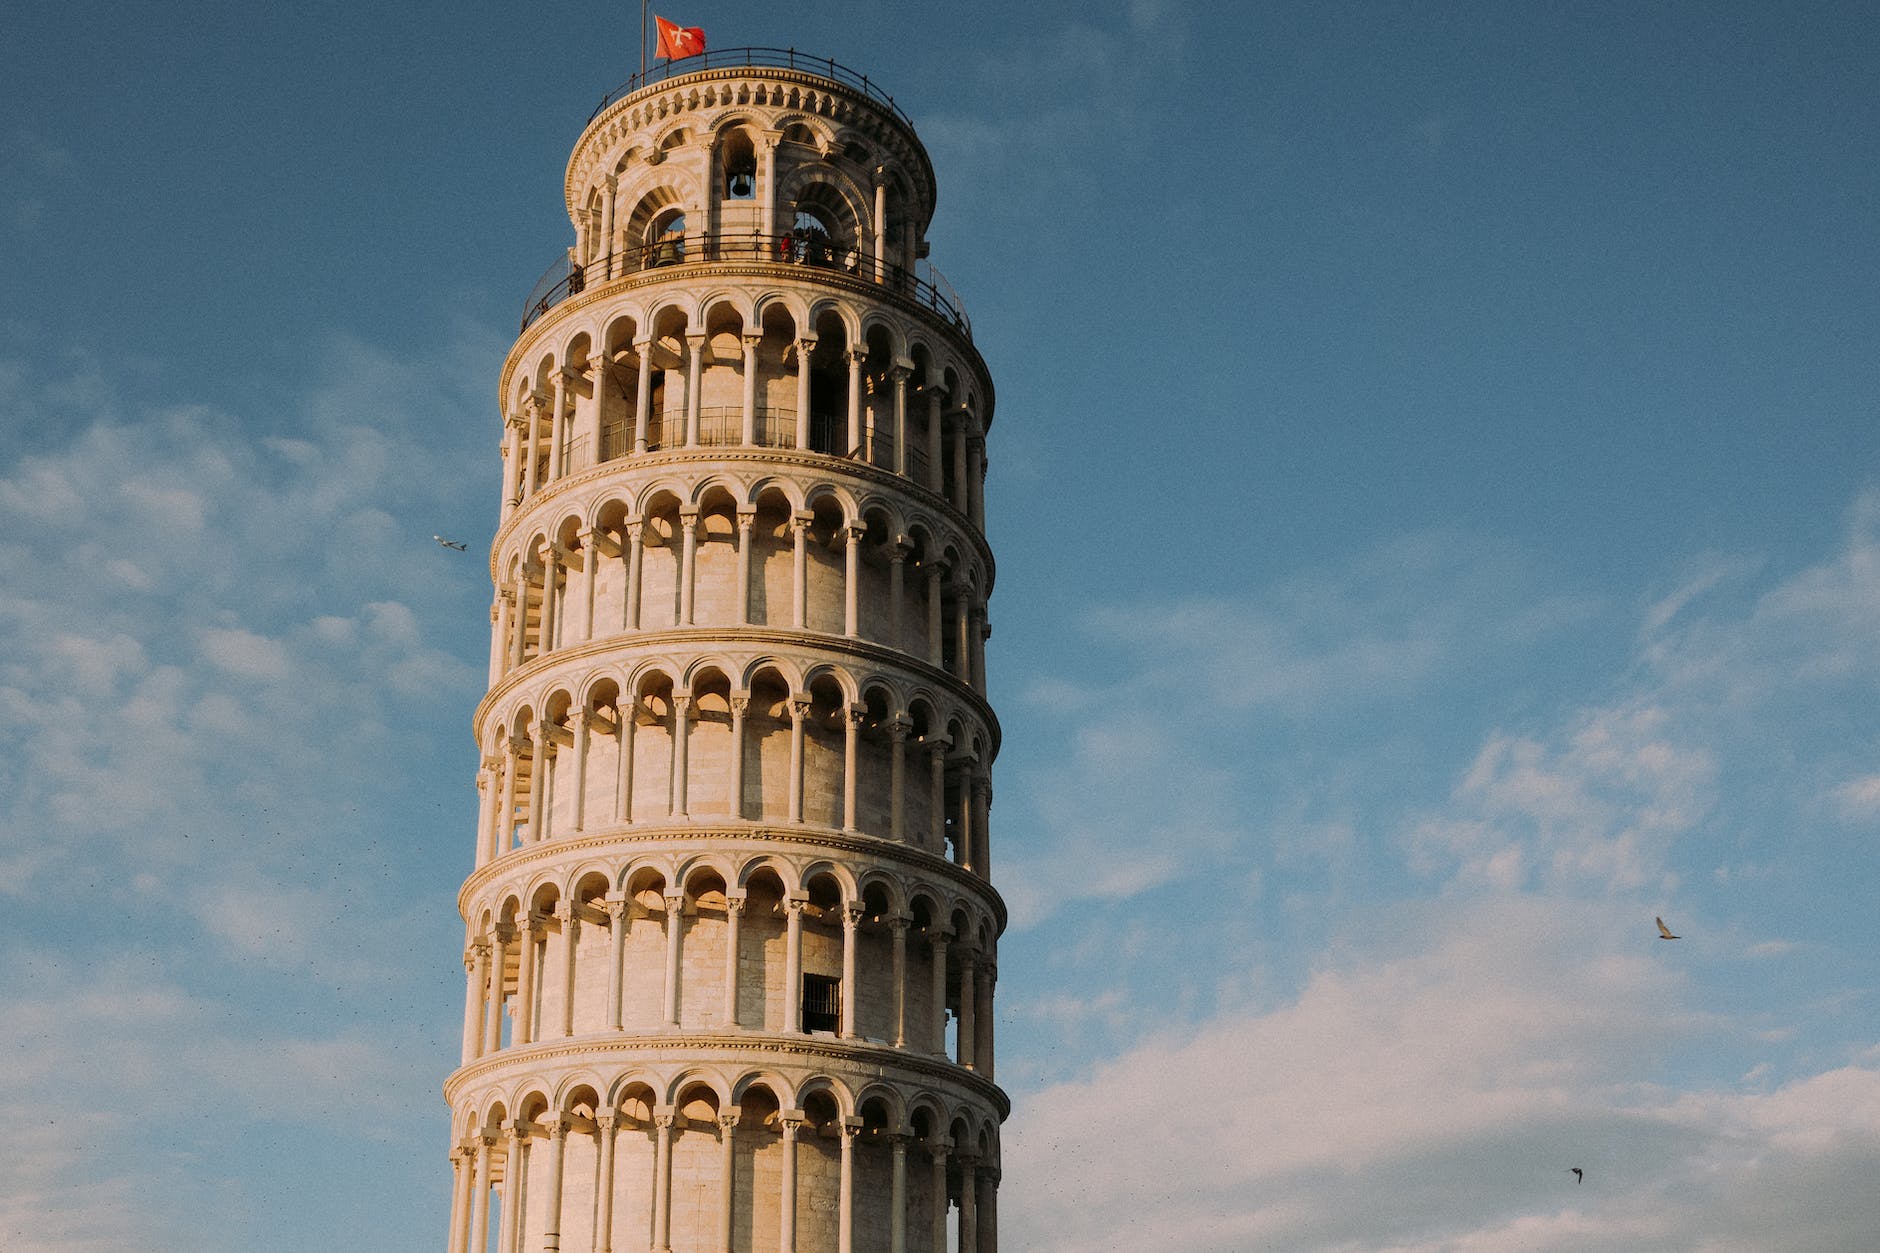 leaning tower of pisa under blue sky